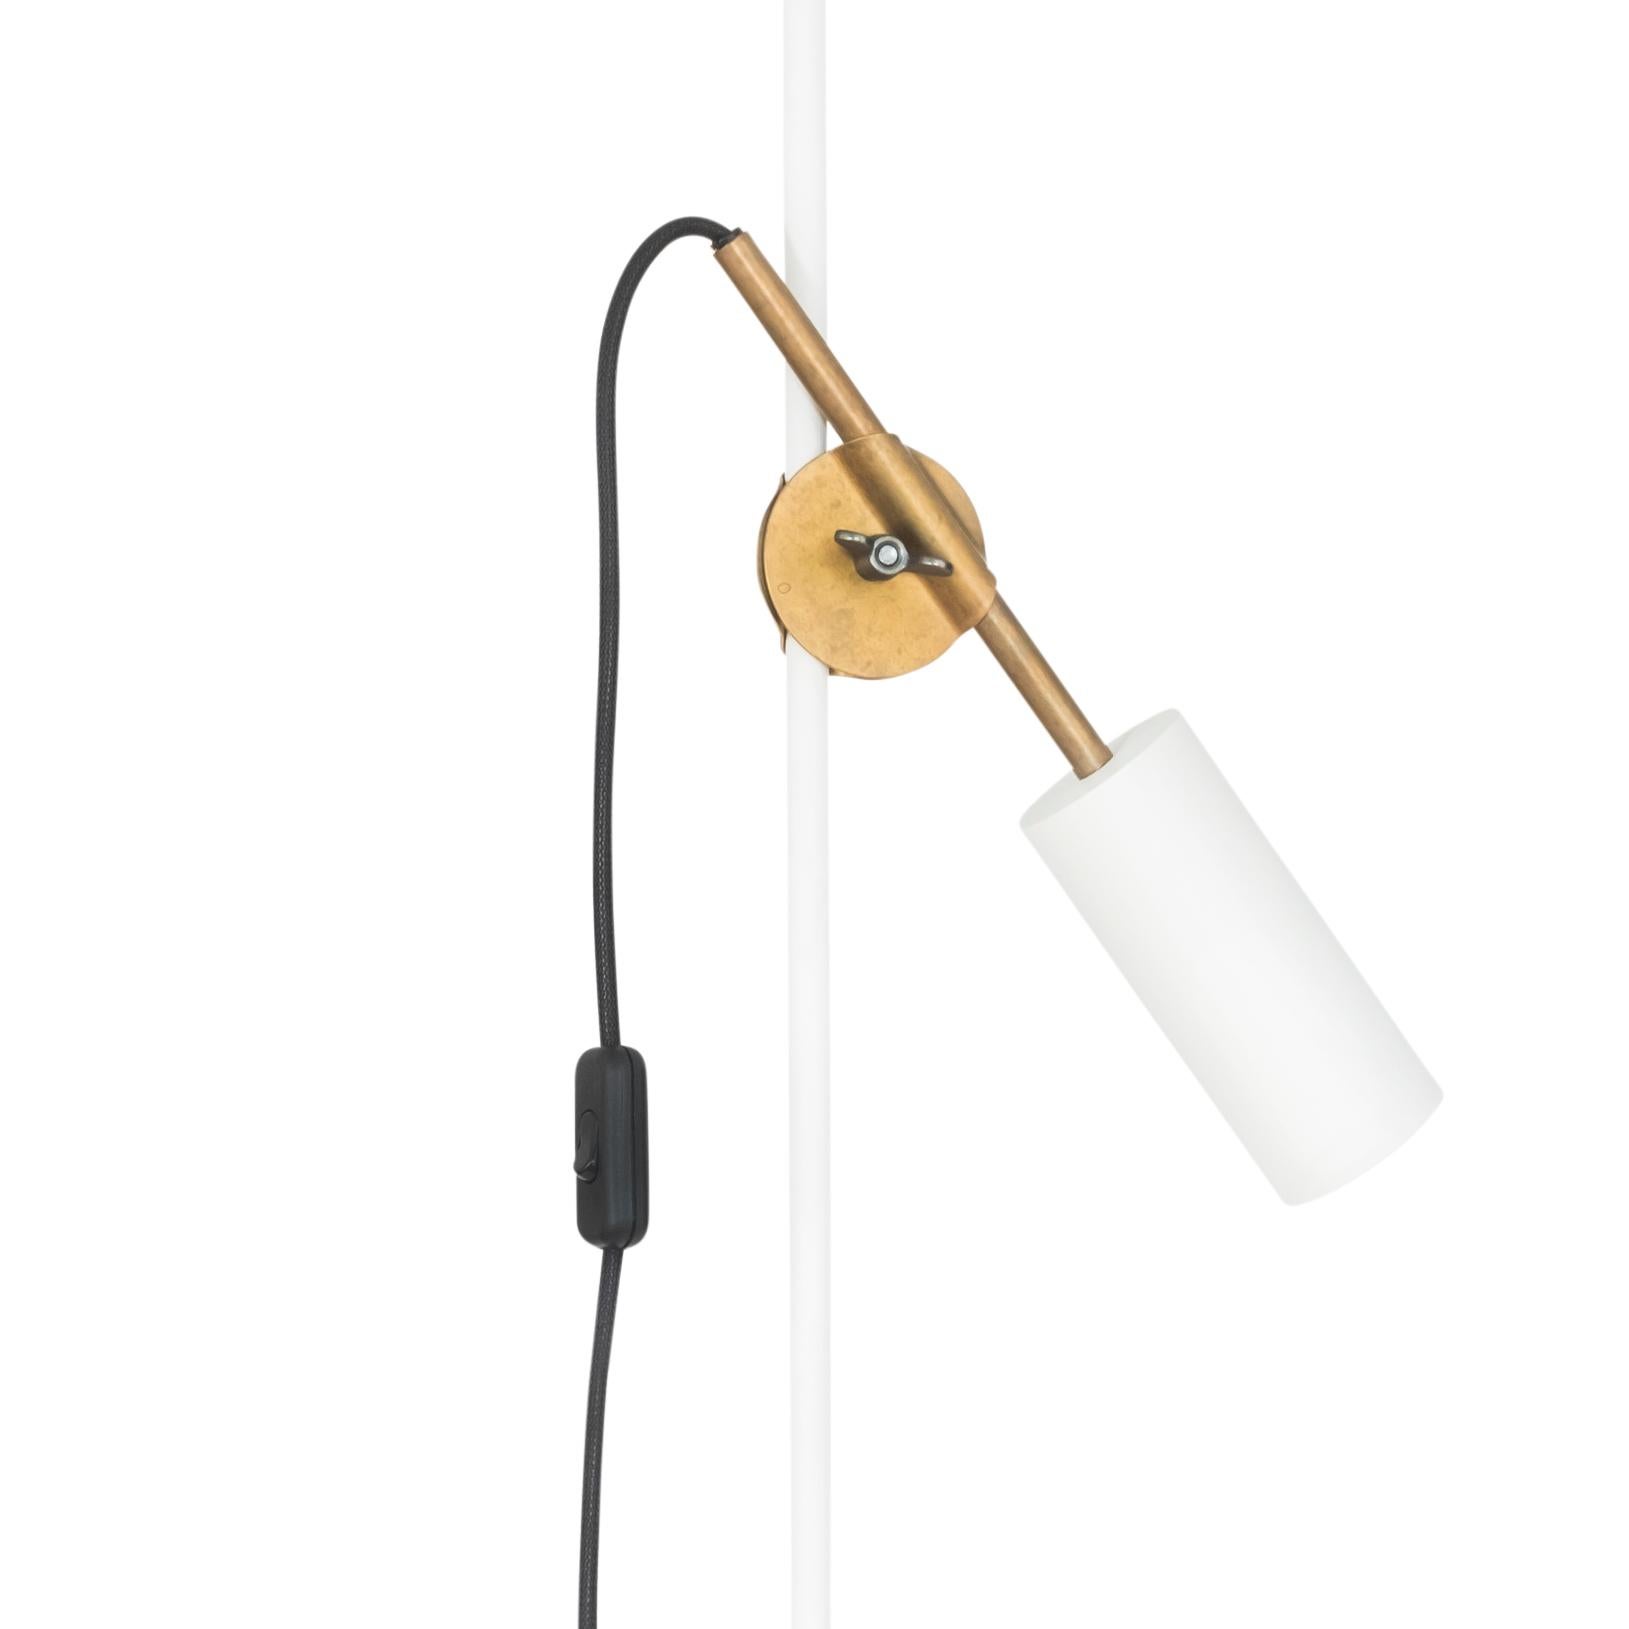 Floor lamp model Stav designed by Johan Carpner and manufactured by Konsthantverk.

The production of lamps, wall lights and floor lamps are manufactured using craftsman’s techniques with the same materials and techniques as the first